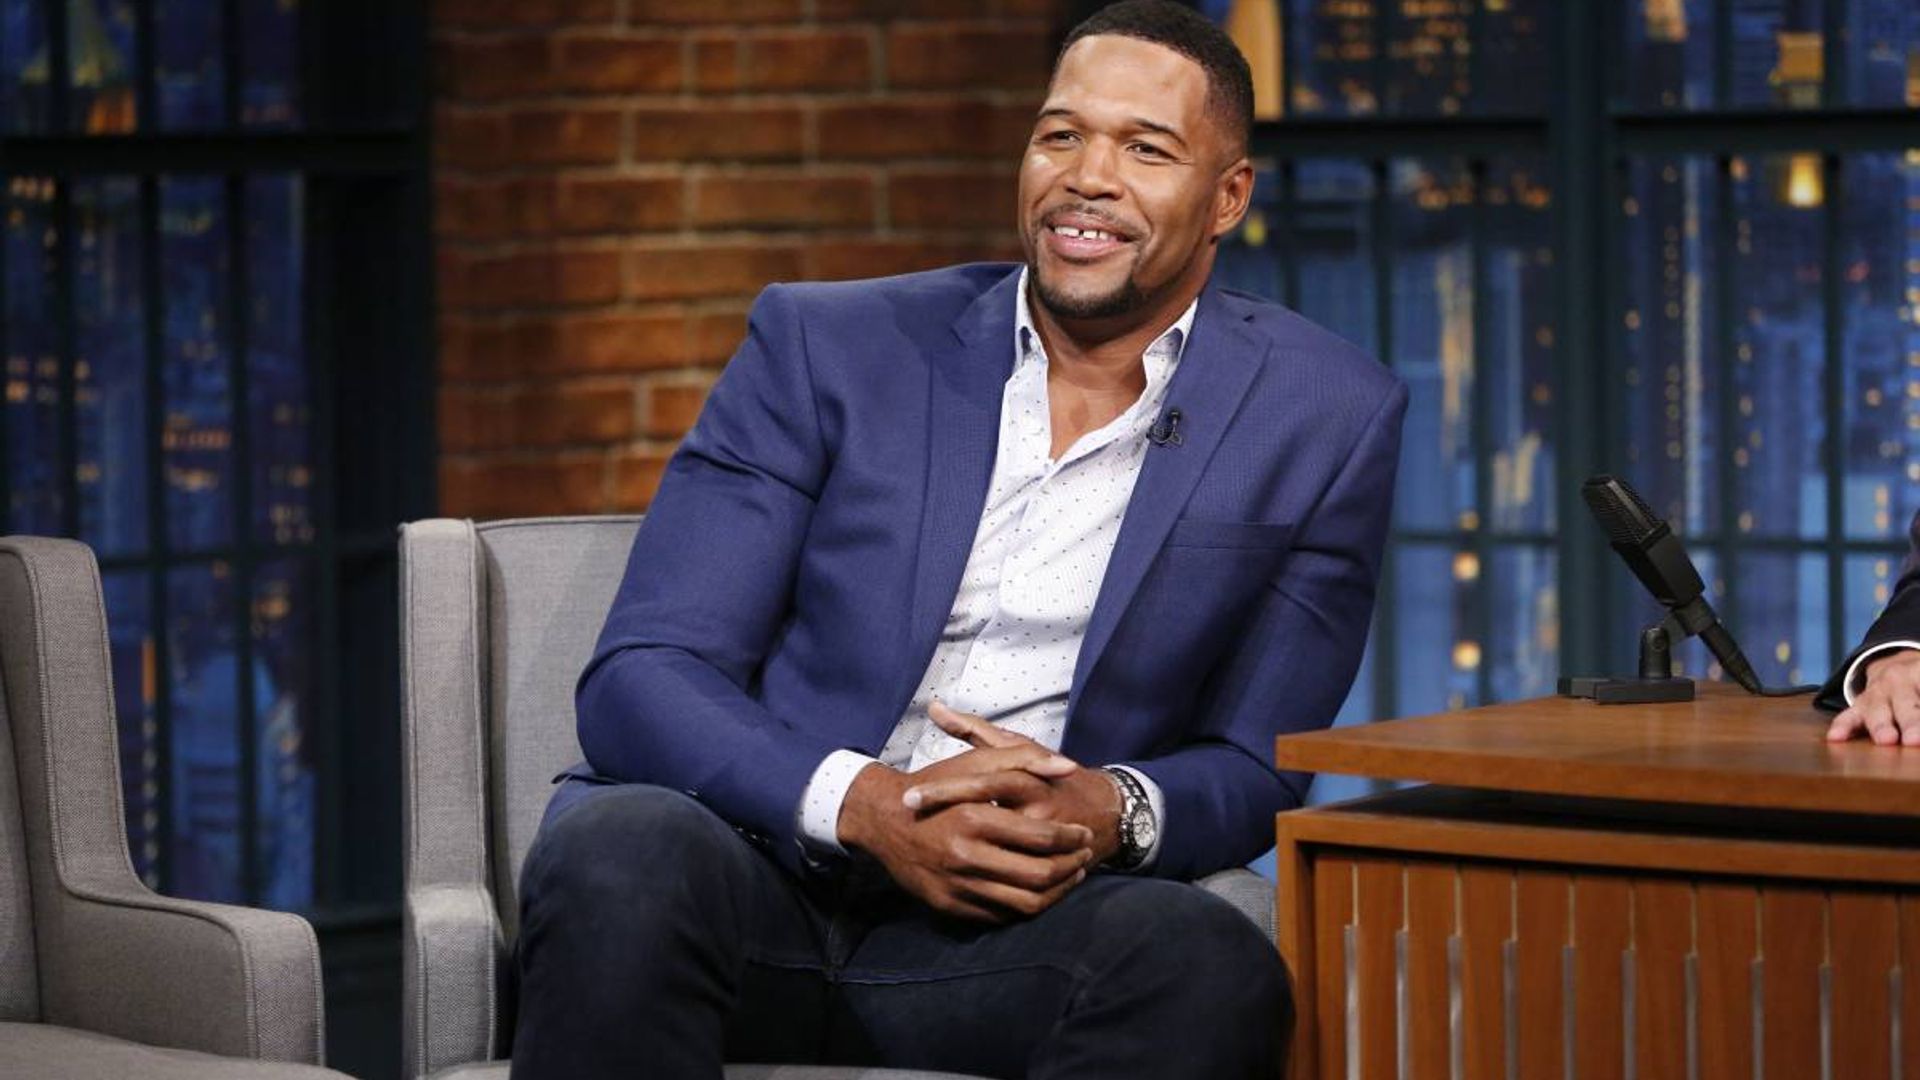 GMA's Michael Strahan marks special celebration during time off work that  causes a stir among fans